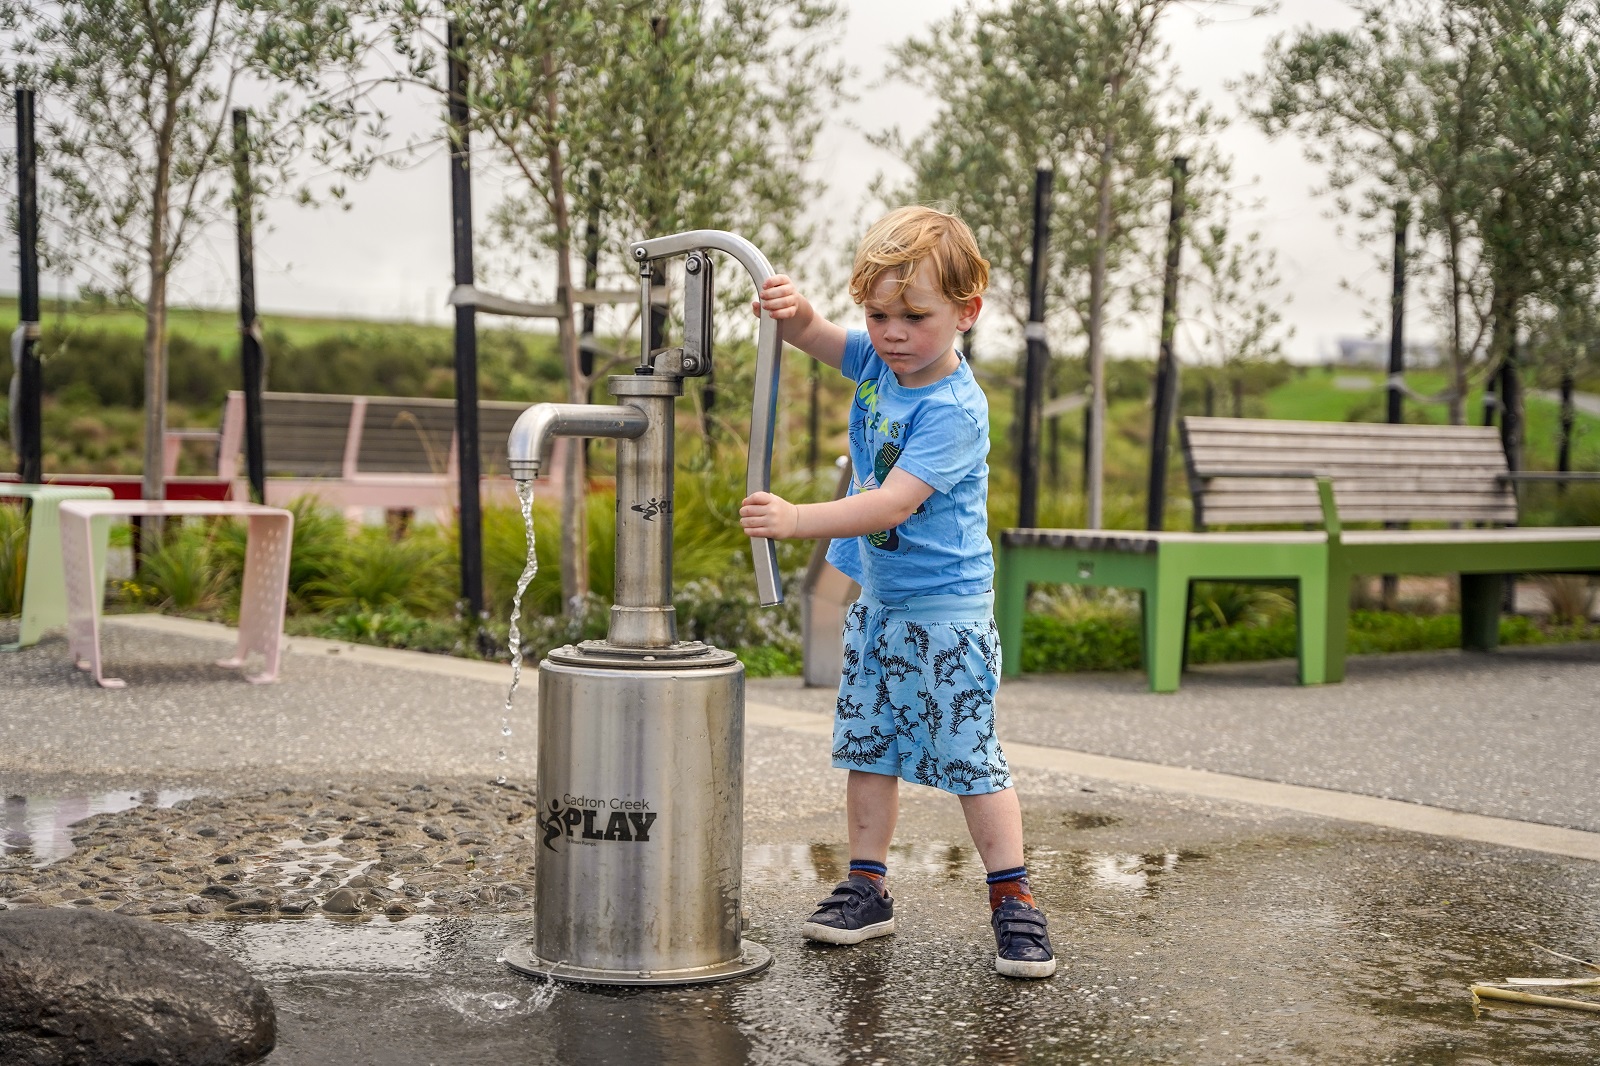 A child playing water pumps (one of which is wheelchair accessible) in the water play area of the Kopupaka playground.